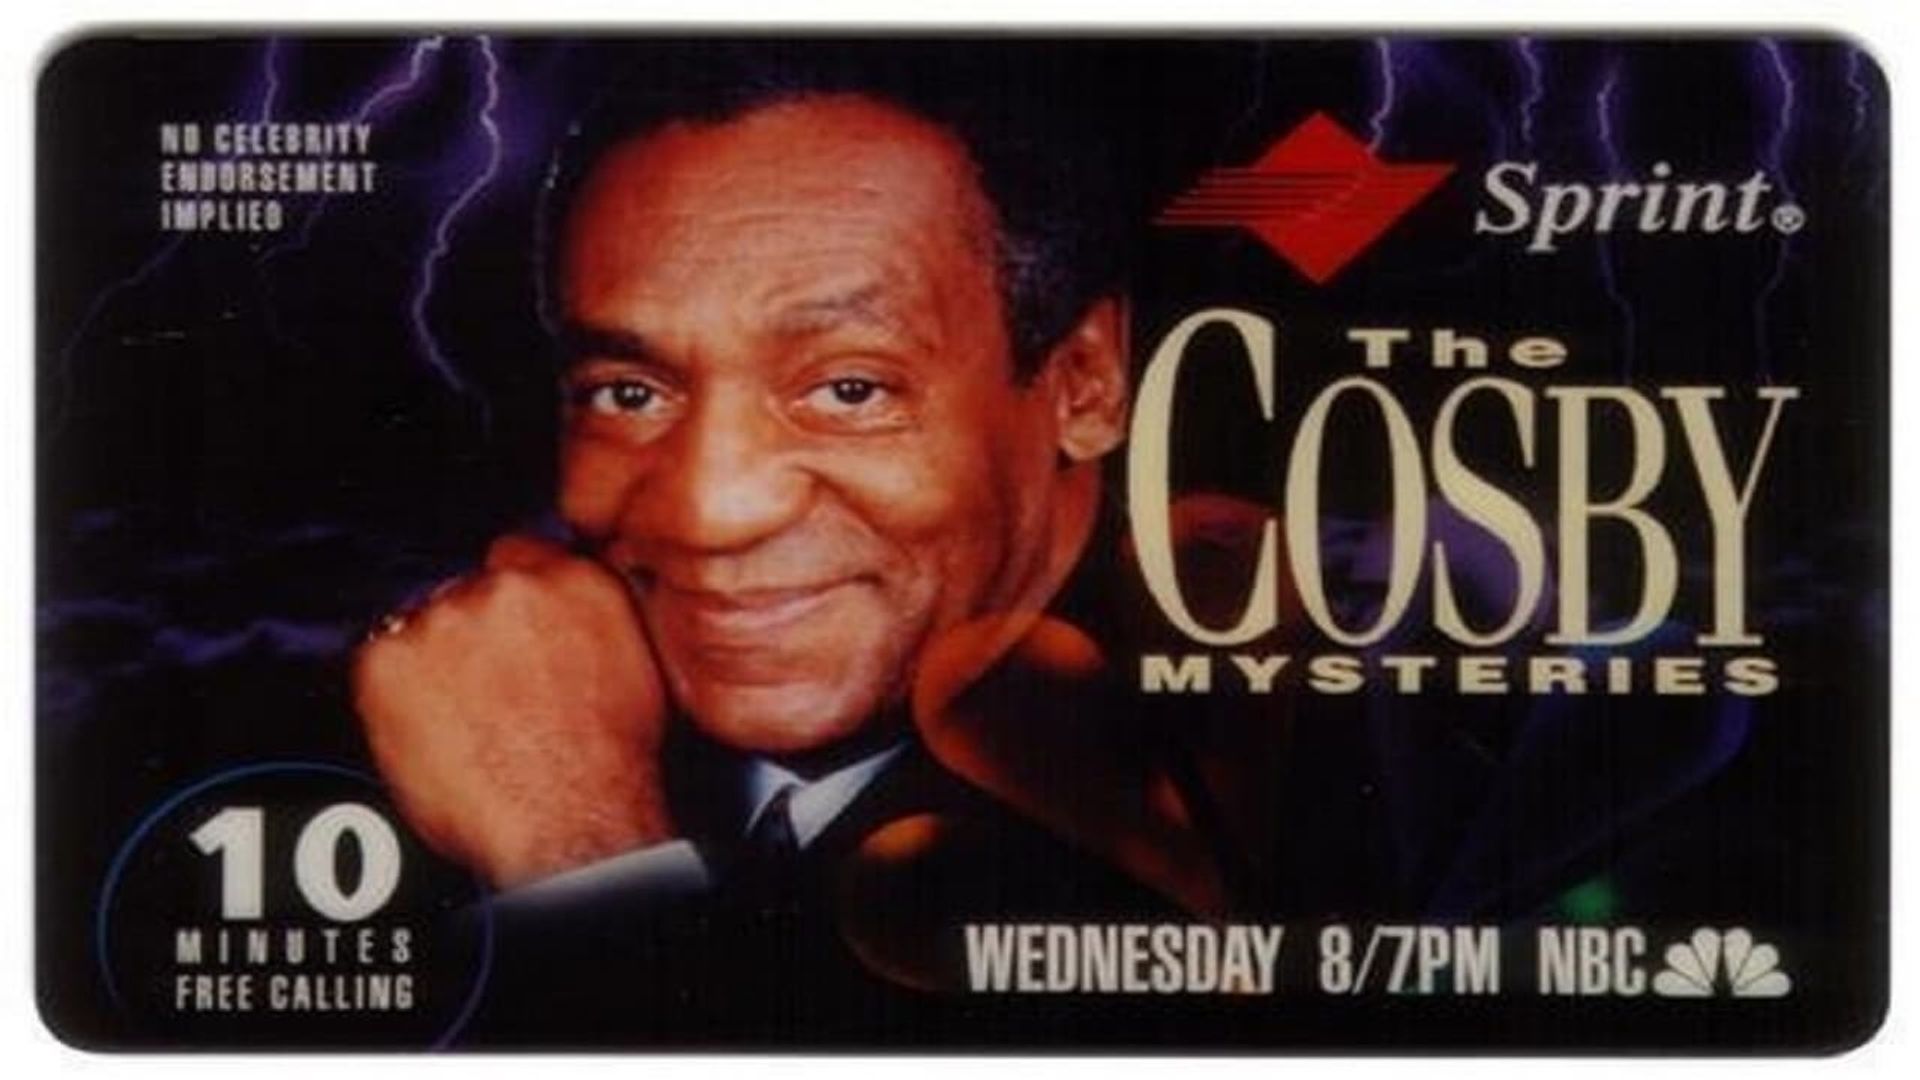 The Cosby Mysteries background